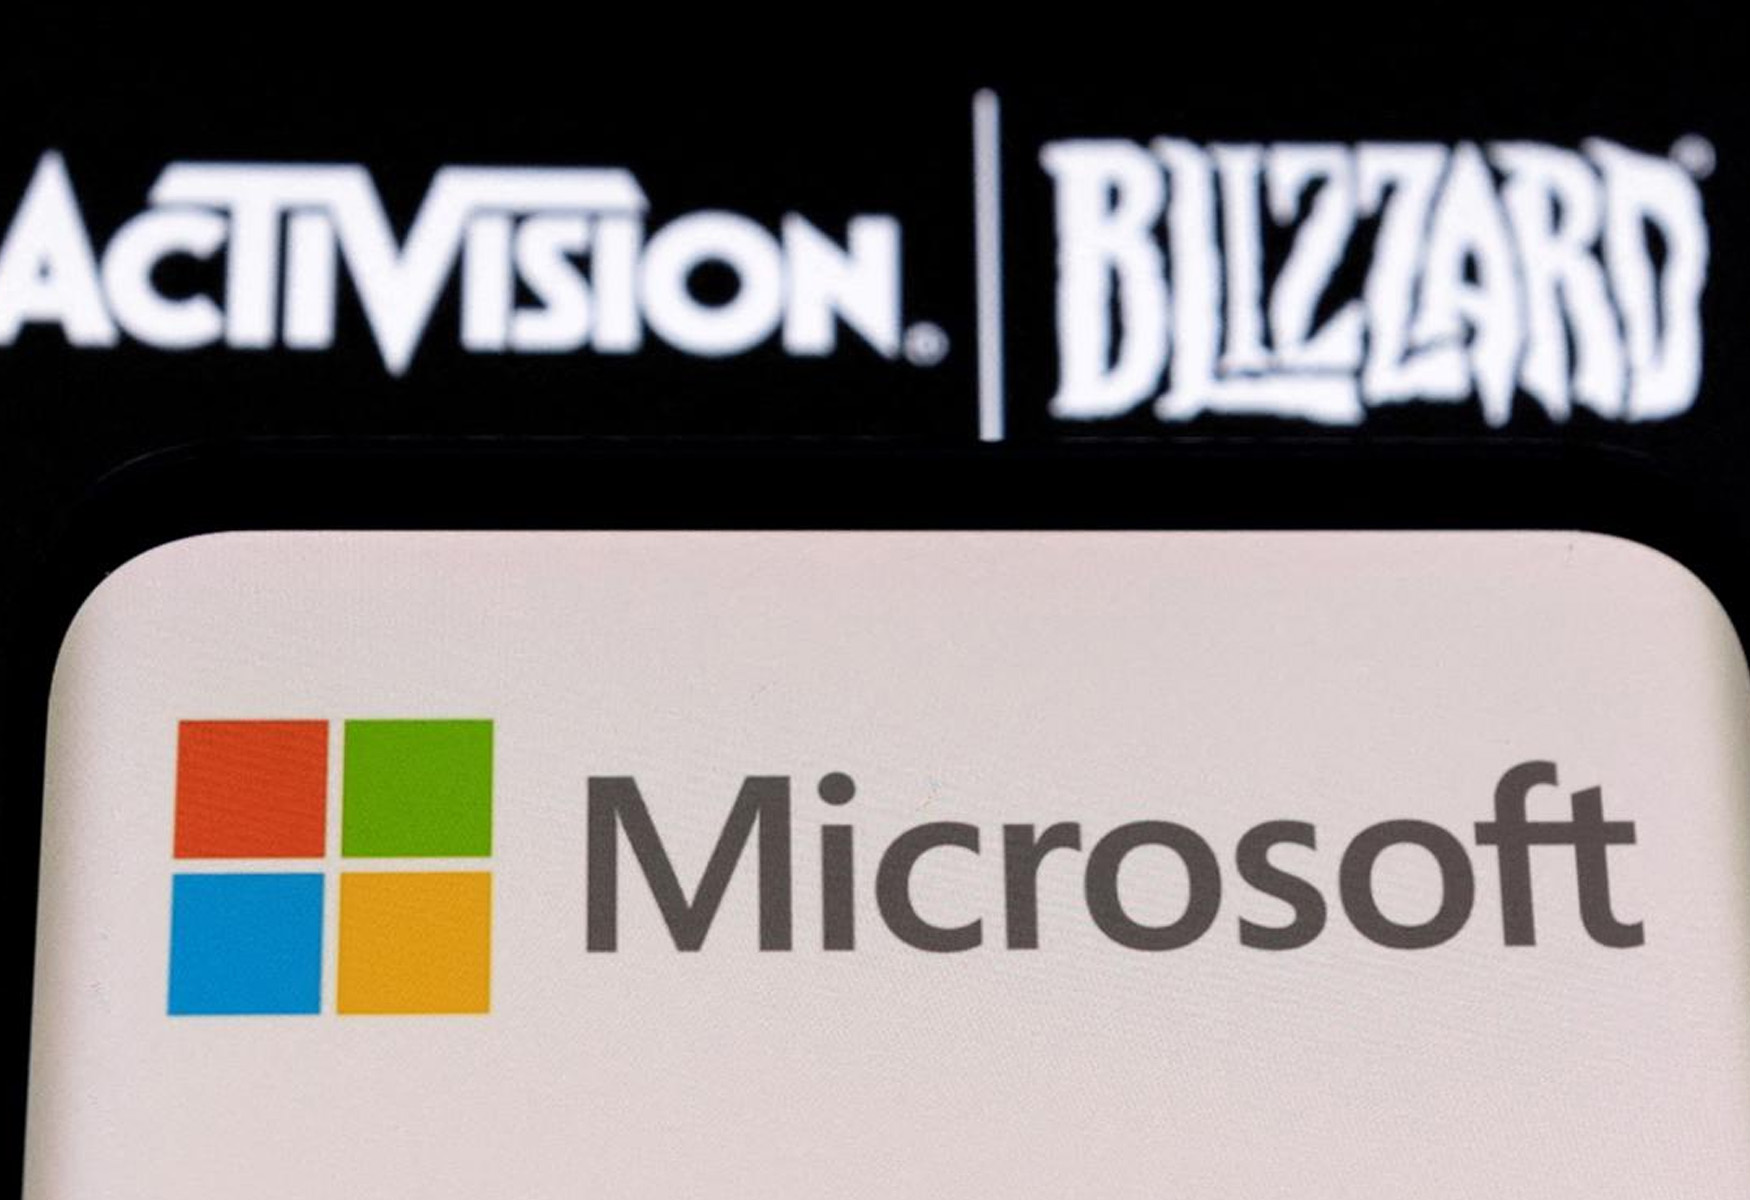 microsofts-68-7b-activision-acquisition-secures-approval-from-uk-regulator